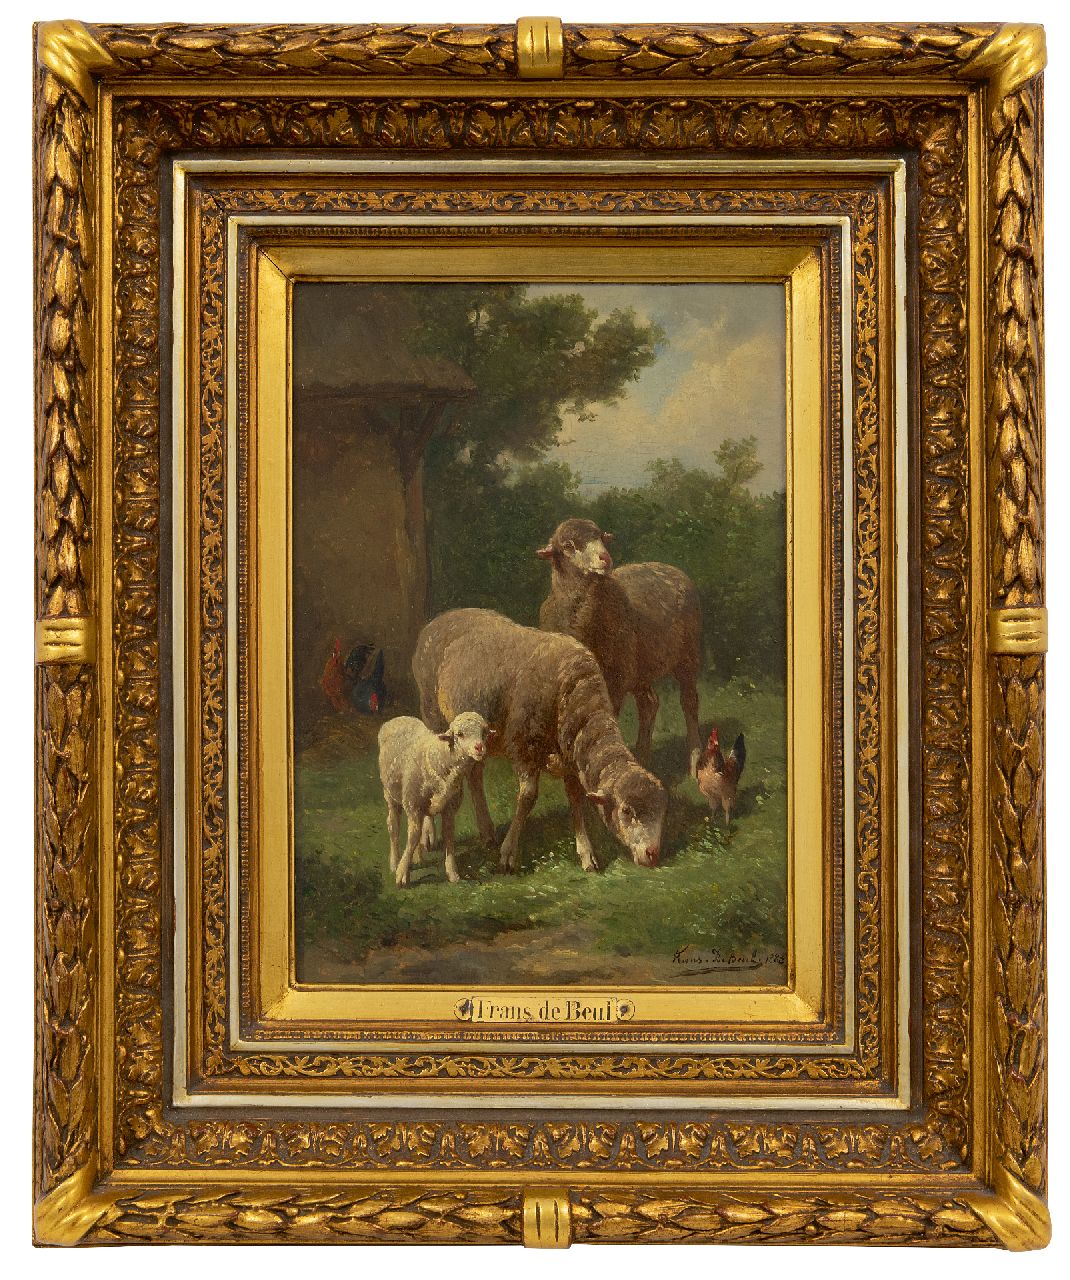 Beul F. de | Frans de Beul, Sheep and a lamb in the meadow, oil on panel 34.1 x 23.8 cm, signed l.r. and dated 1883